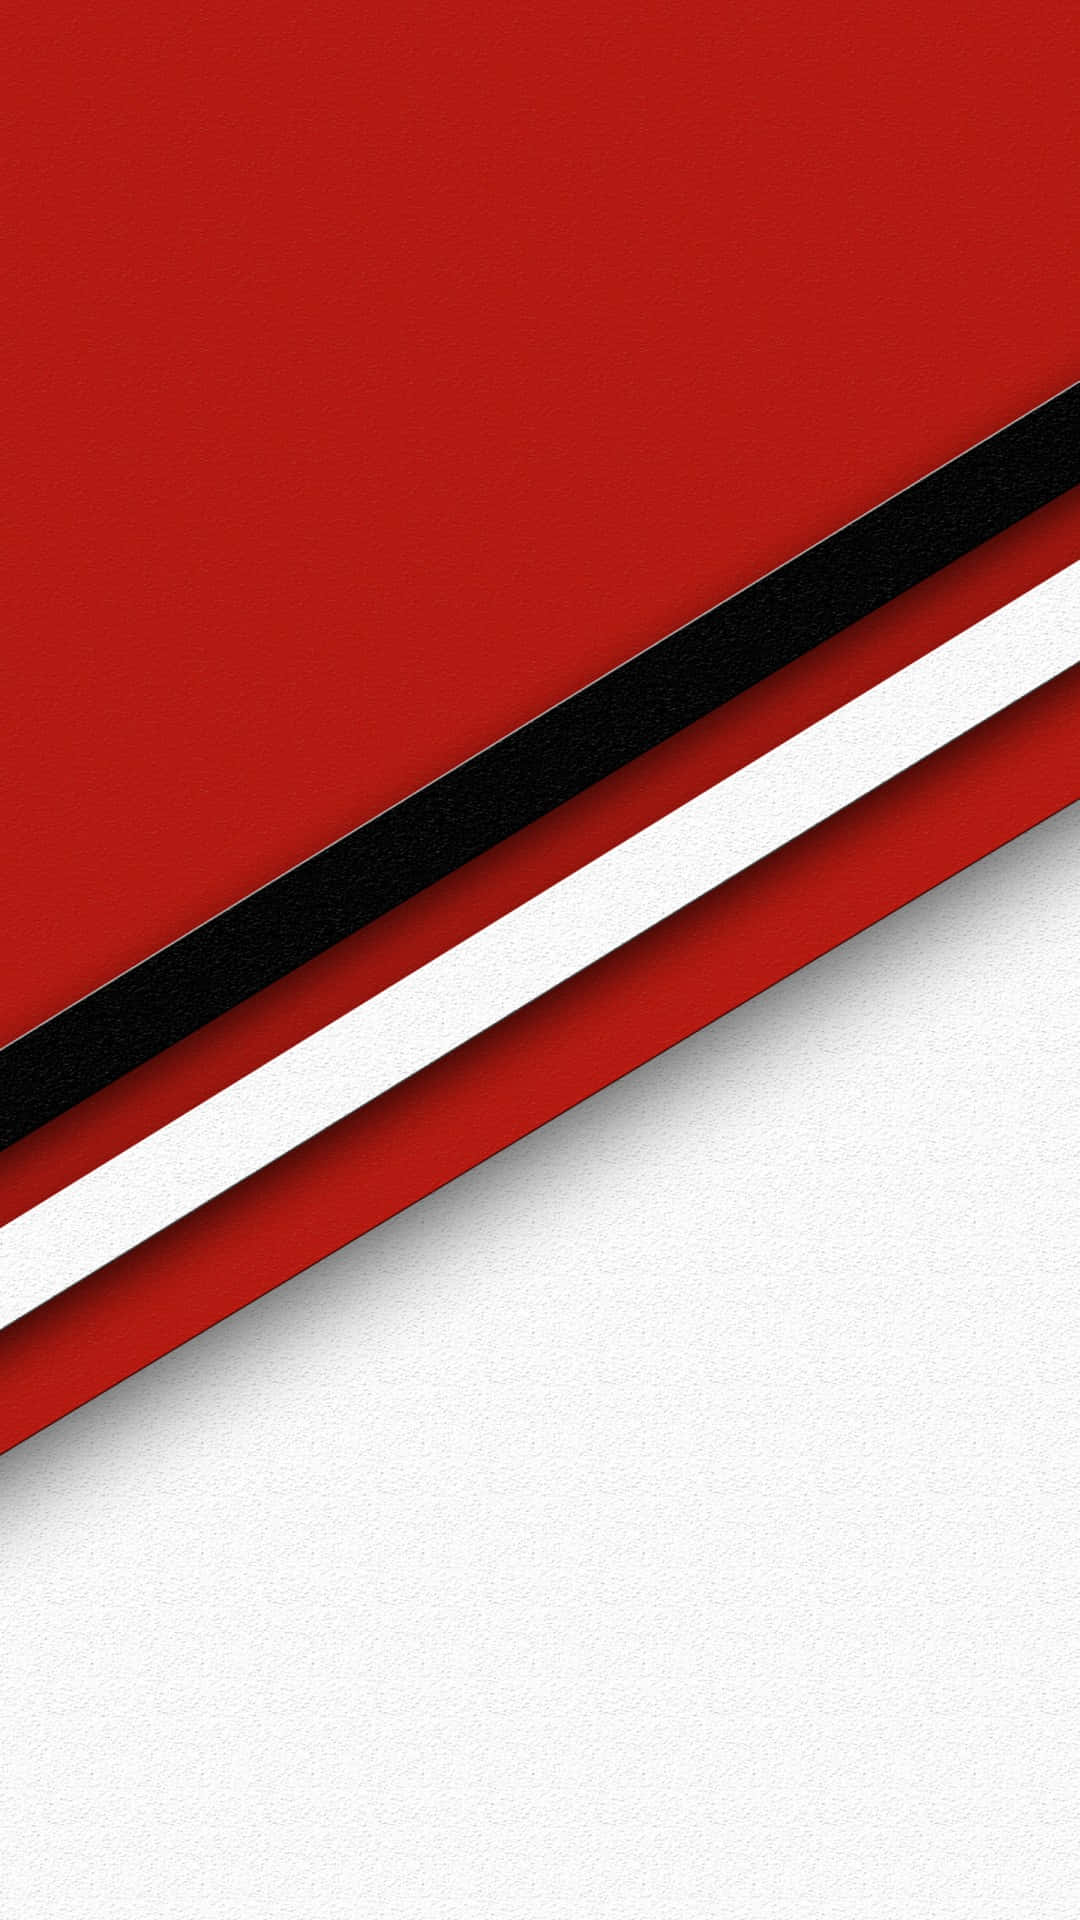 Boldly striking black and red contrasts Wallpaper